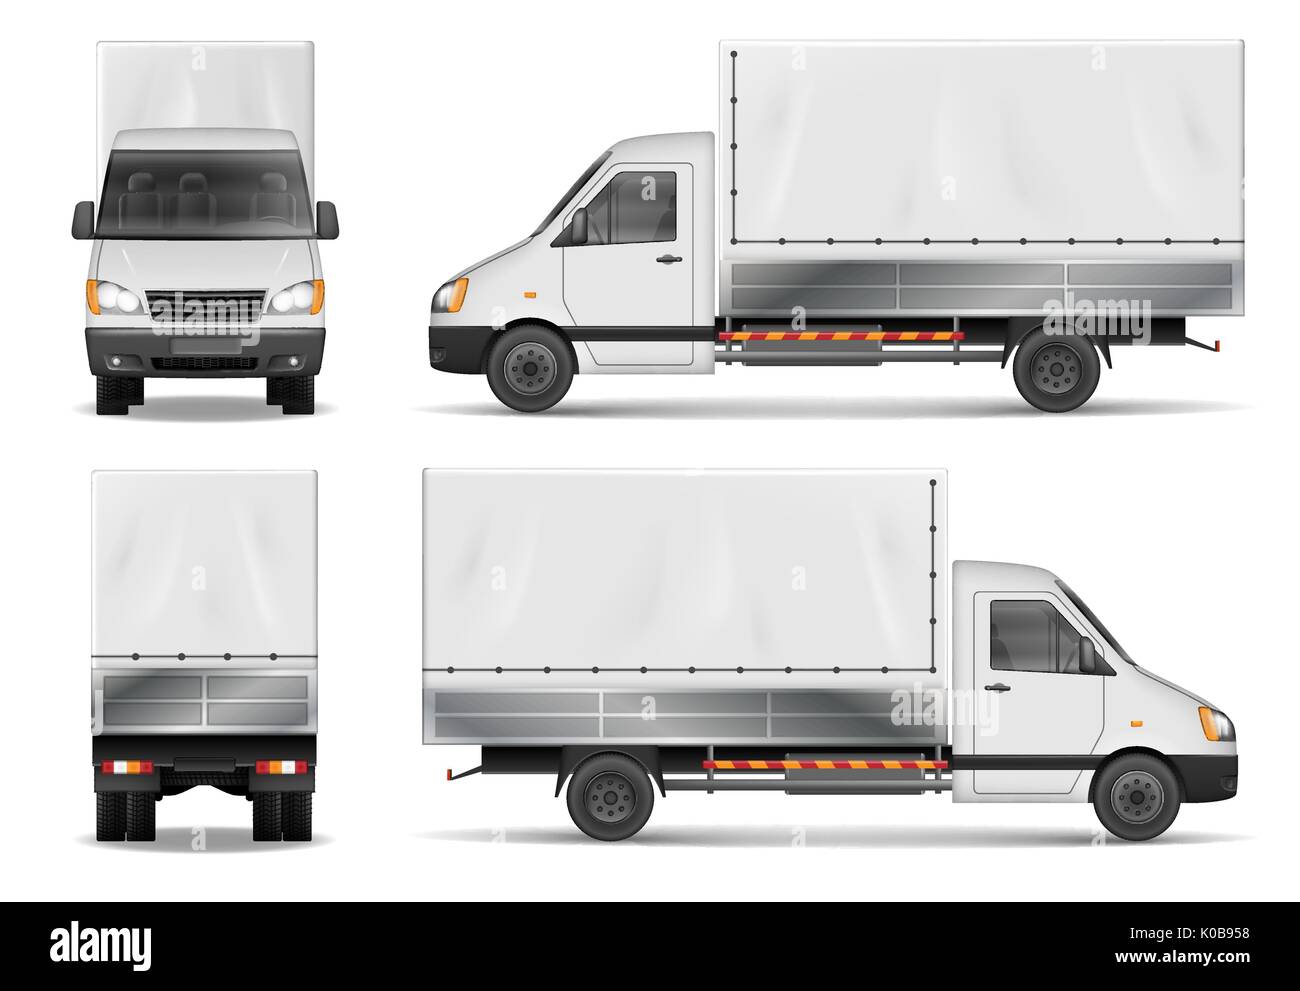 Semi truck isolated on white. Commercial cargo lorry. Delivery truck vector template from side, back, front View. Stock Vector